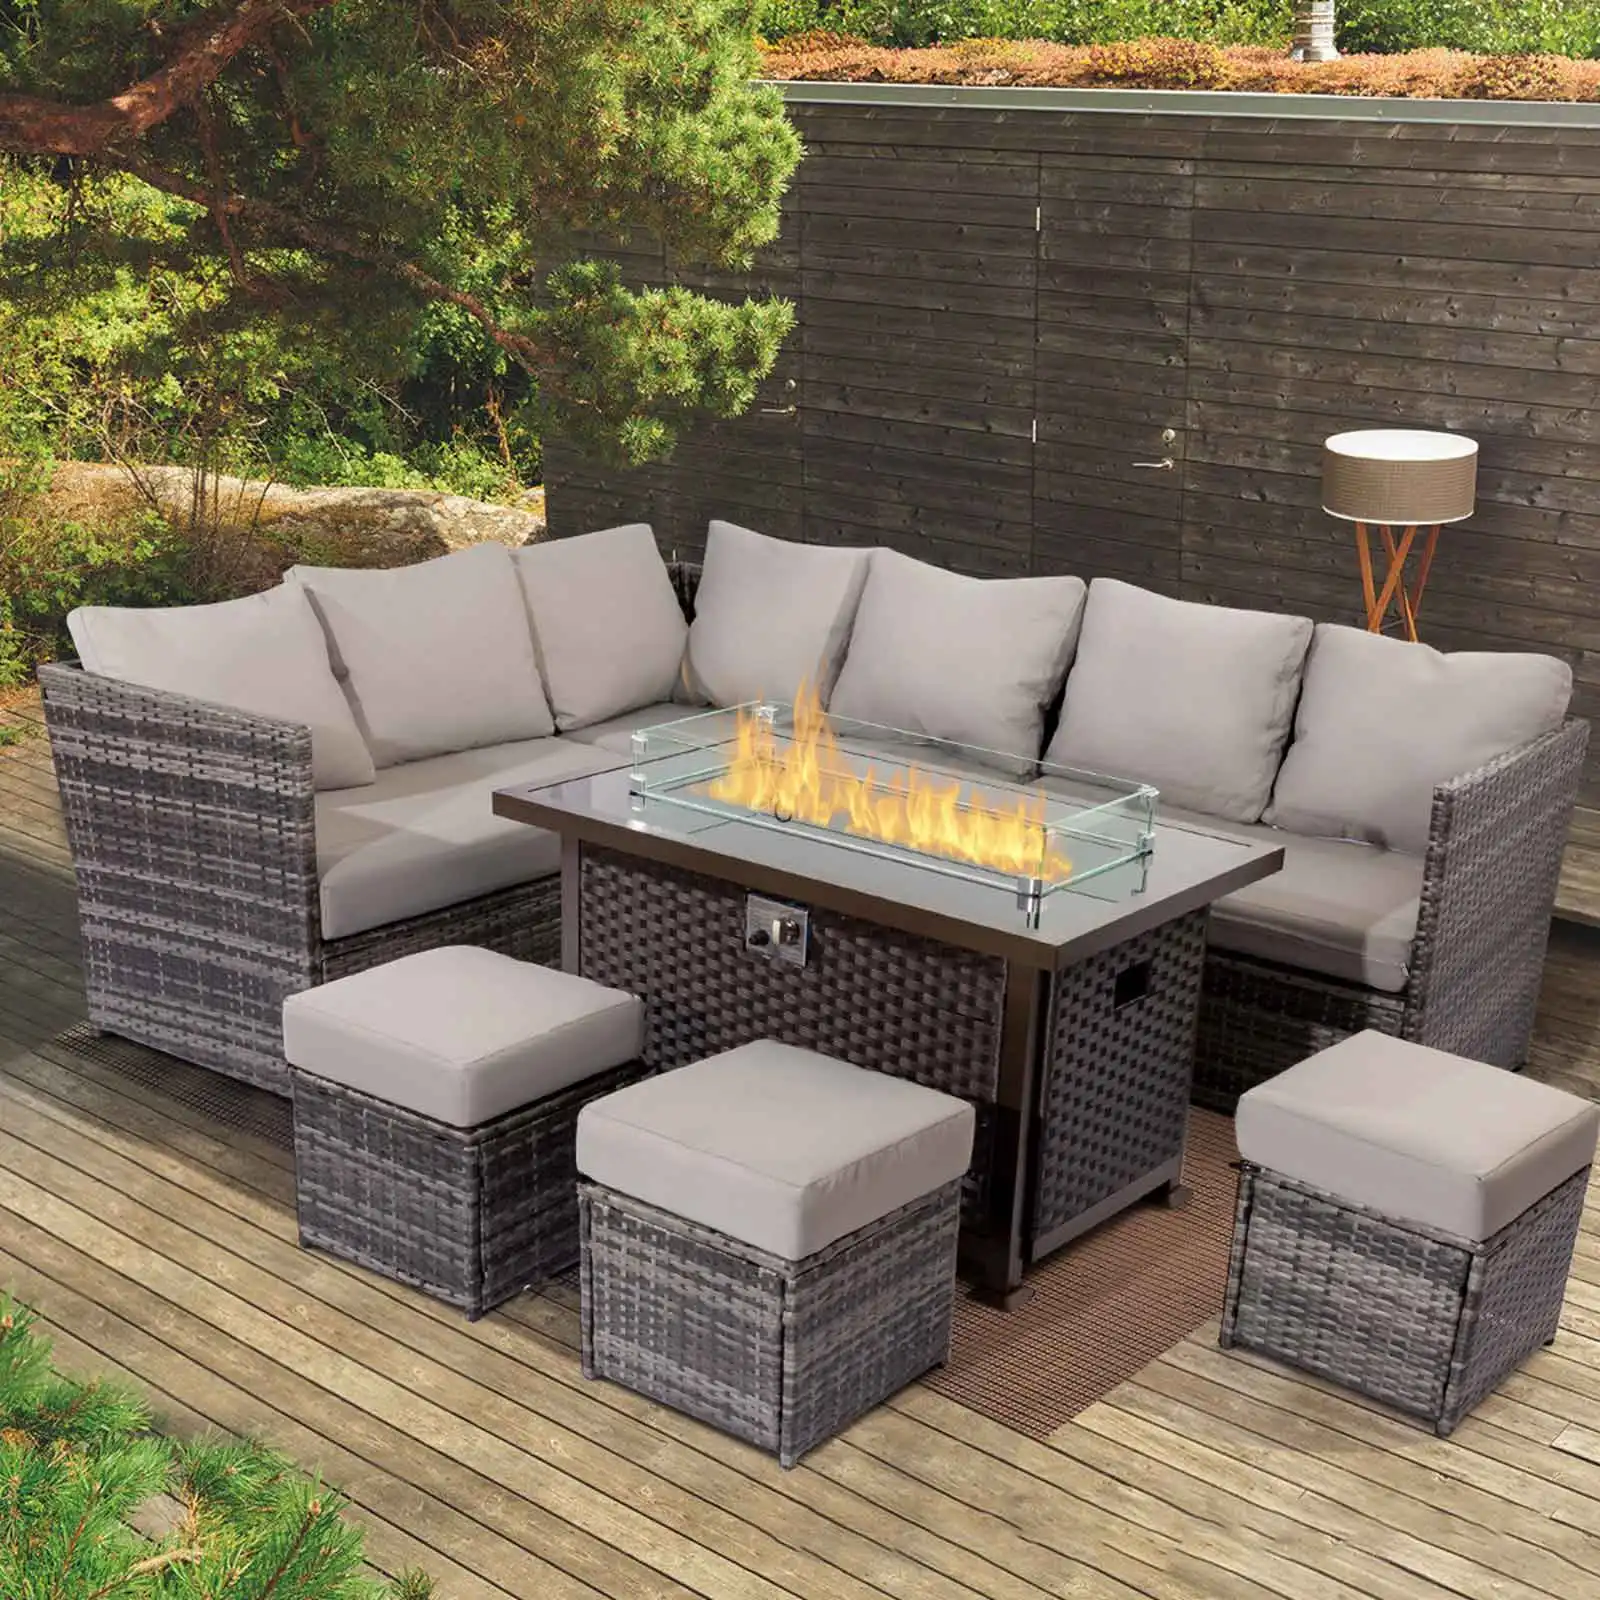 Uland All Weather Patio Lounge Furniture 6pcs Outdoor Sectional Fire Pit Garden Sofa Set